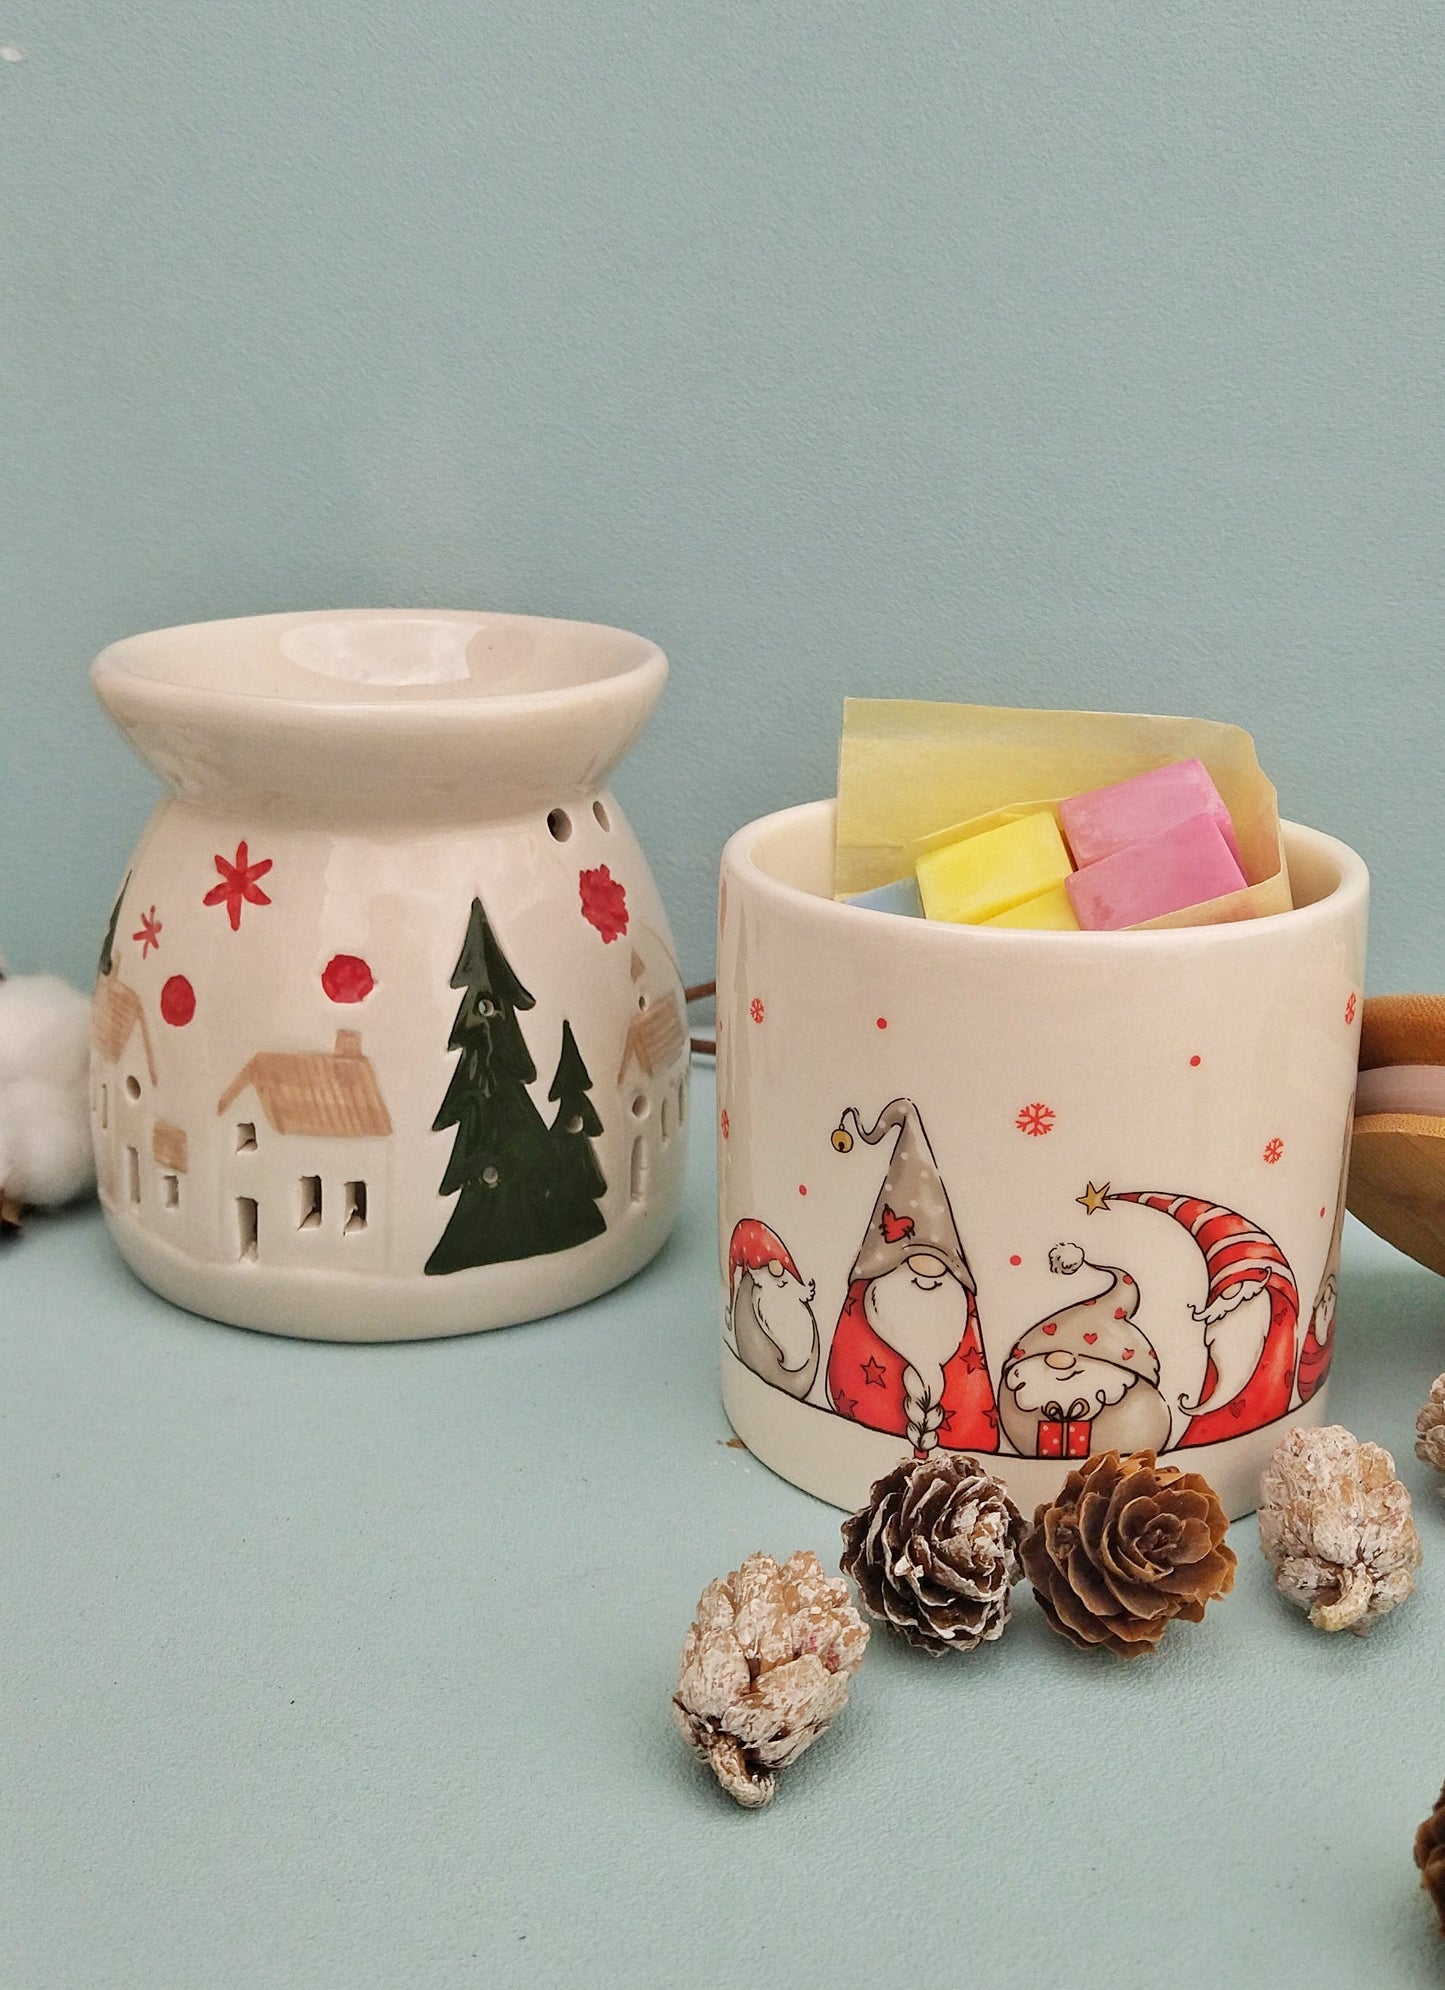 Christmas Ceramic Oil Burner With Gnomes Jar For Wax Melts, Wax Melter Gift Set With Soy Wax Melts